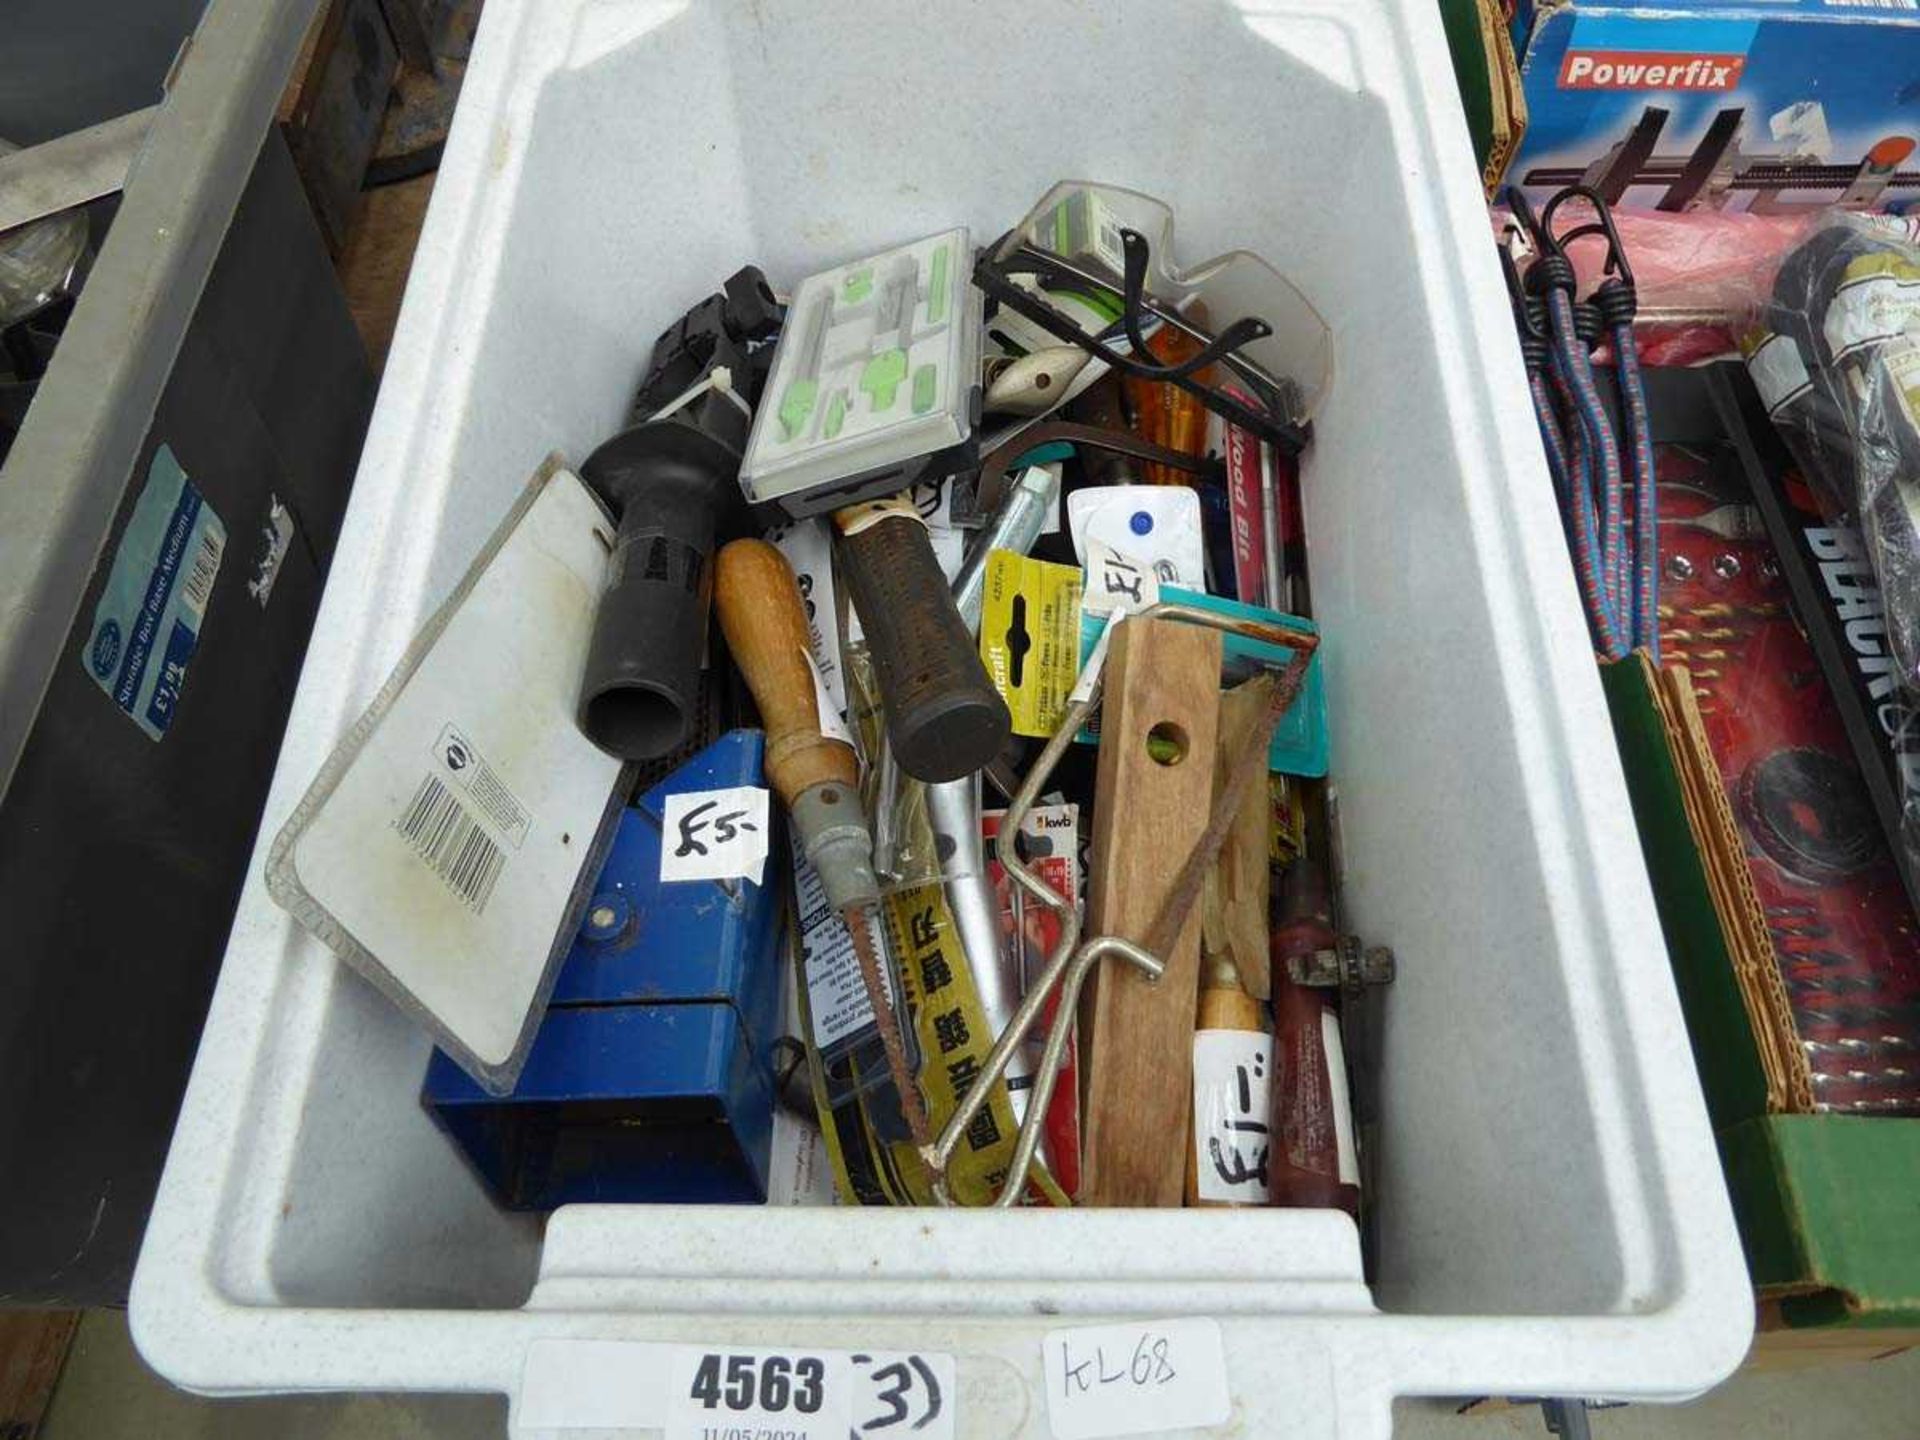 Box containing hammers, safety goggles etc